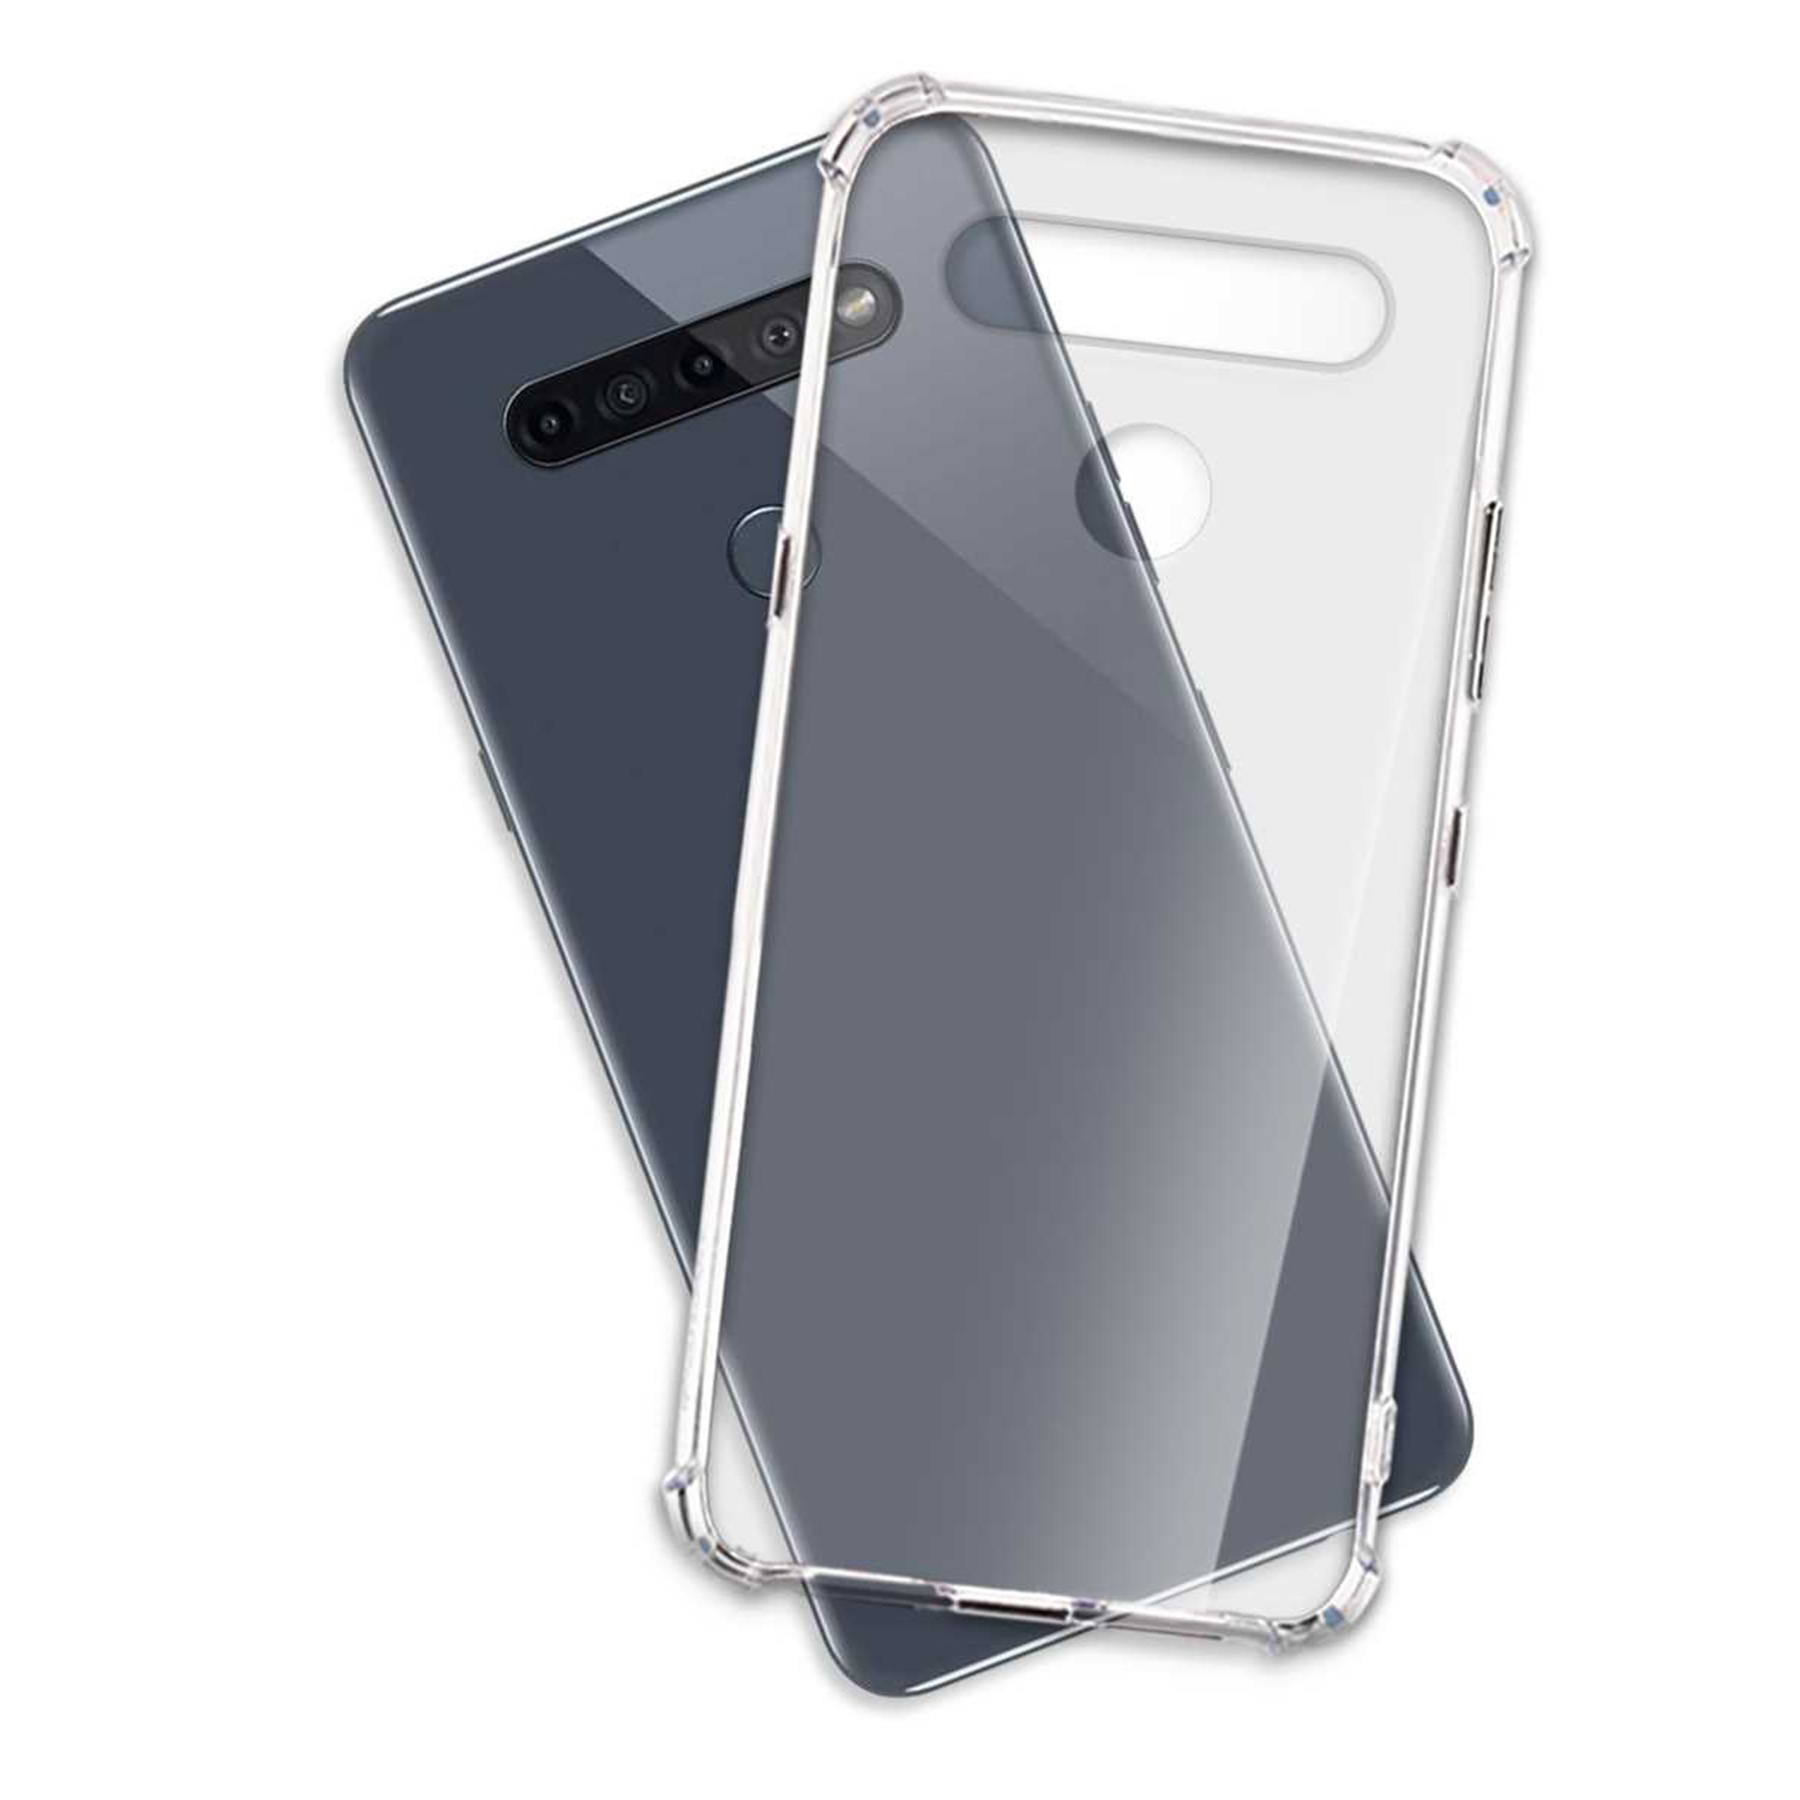 Backcover, ENERGY MTB K51S, MORE Transparent Case, Armor LG, Clear